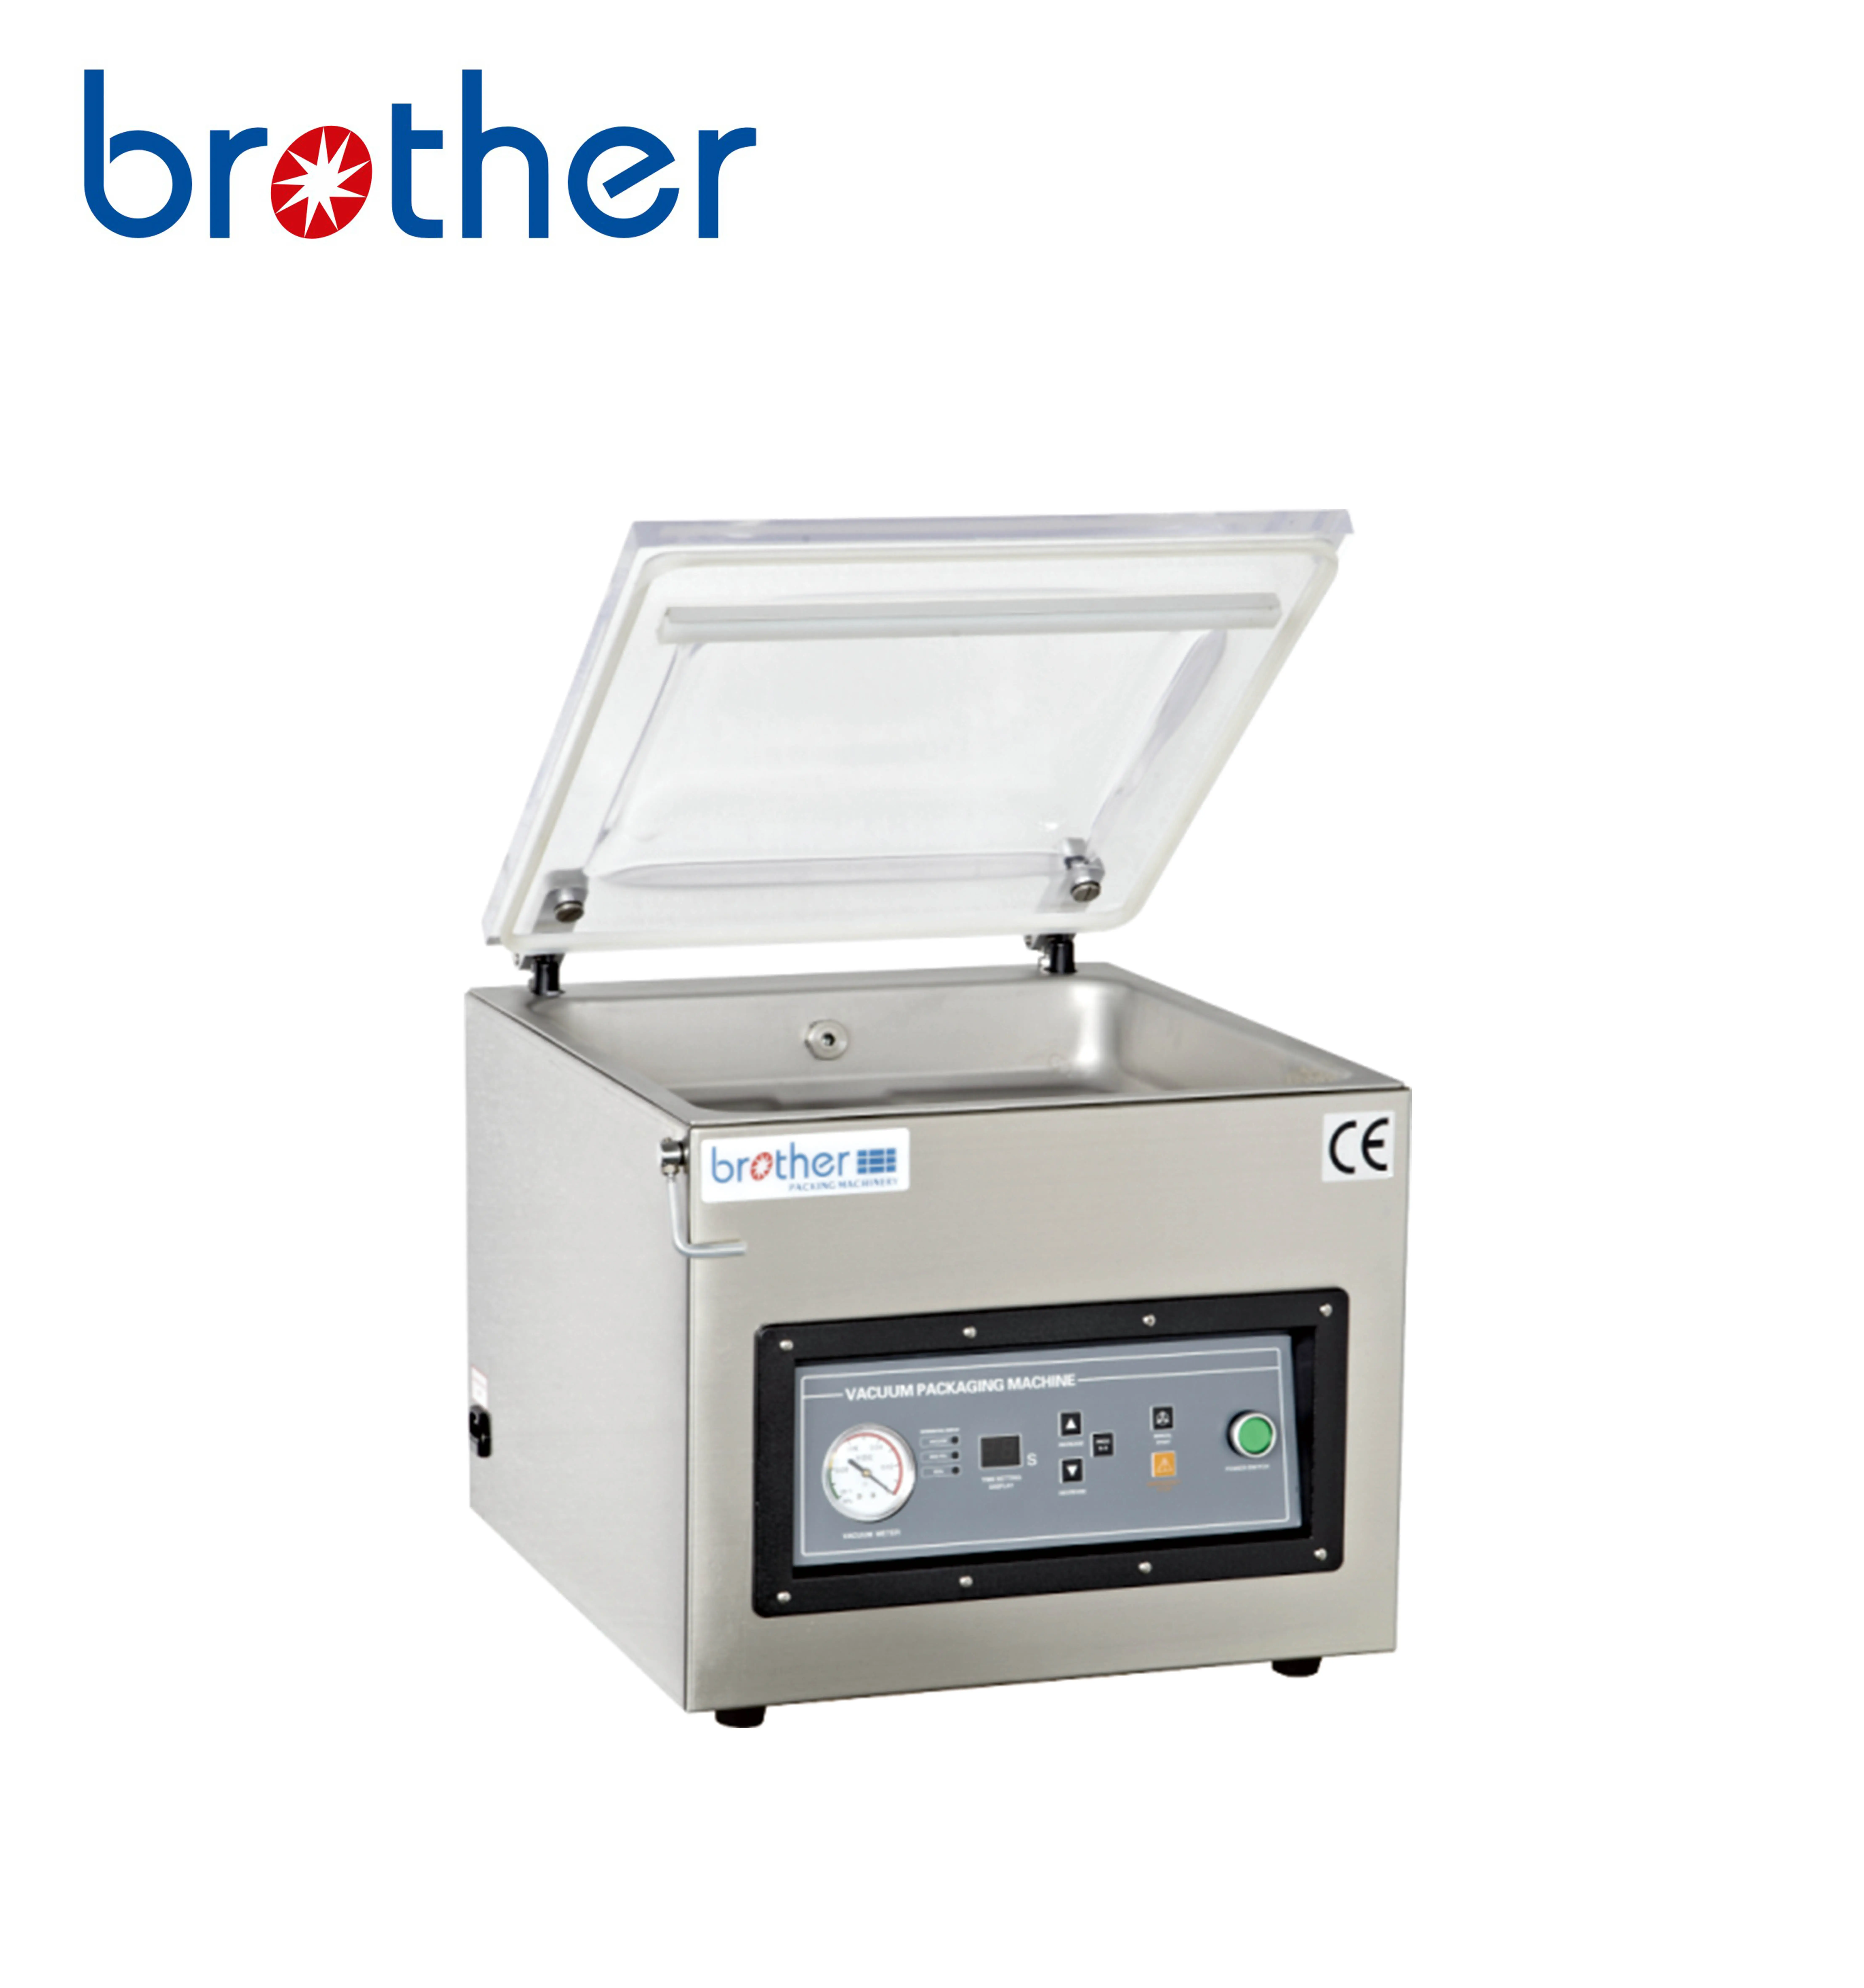 Professional 220V/50-60HZ Commercial Vacuum Packer,Best Vacuum Packing Machine Manufacturers